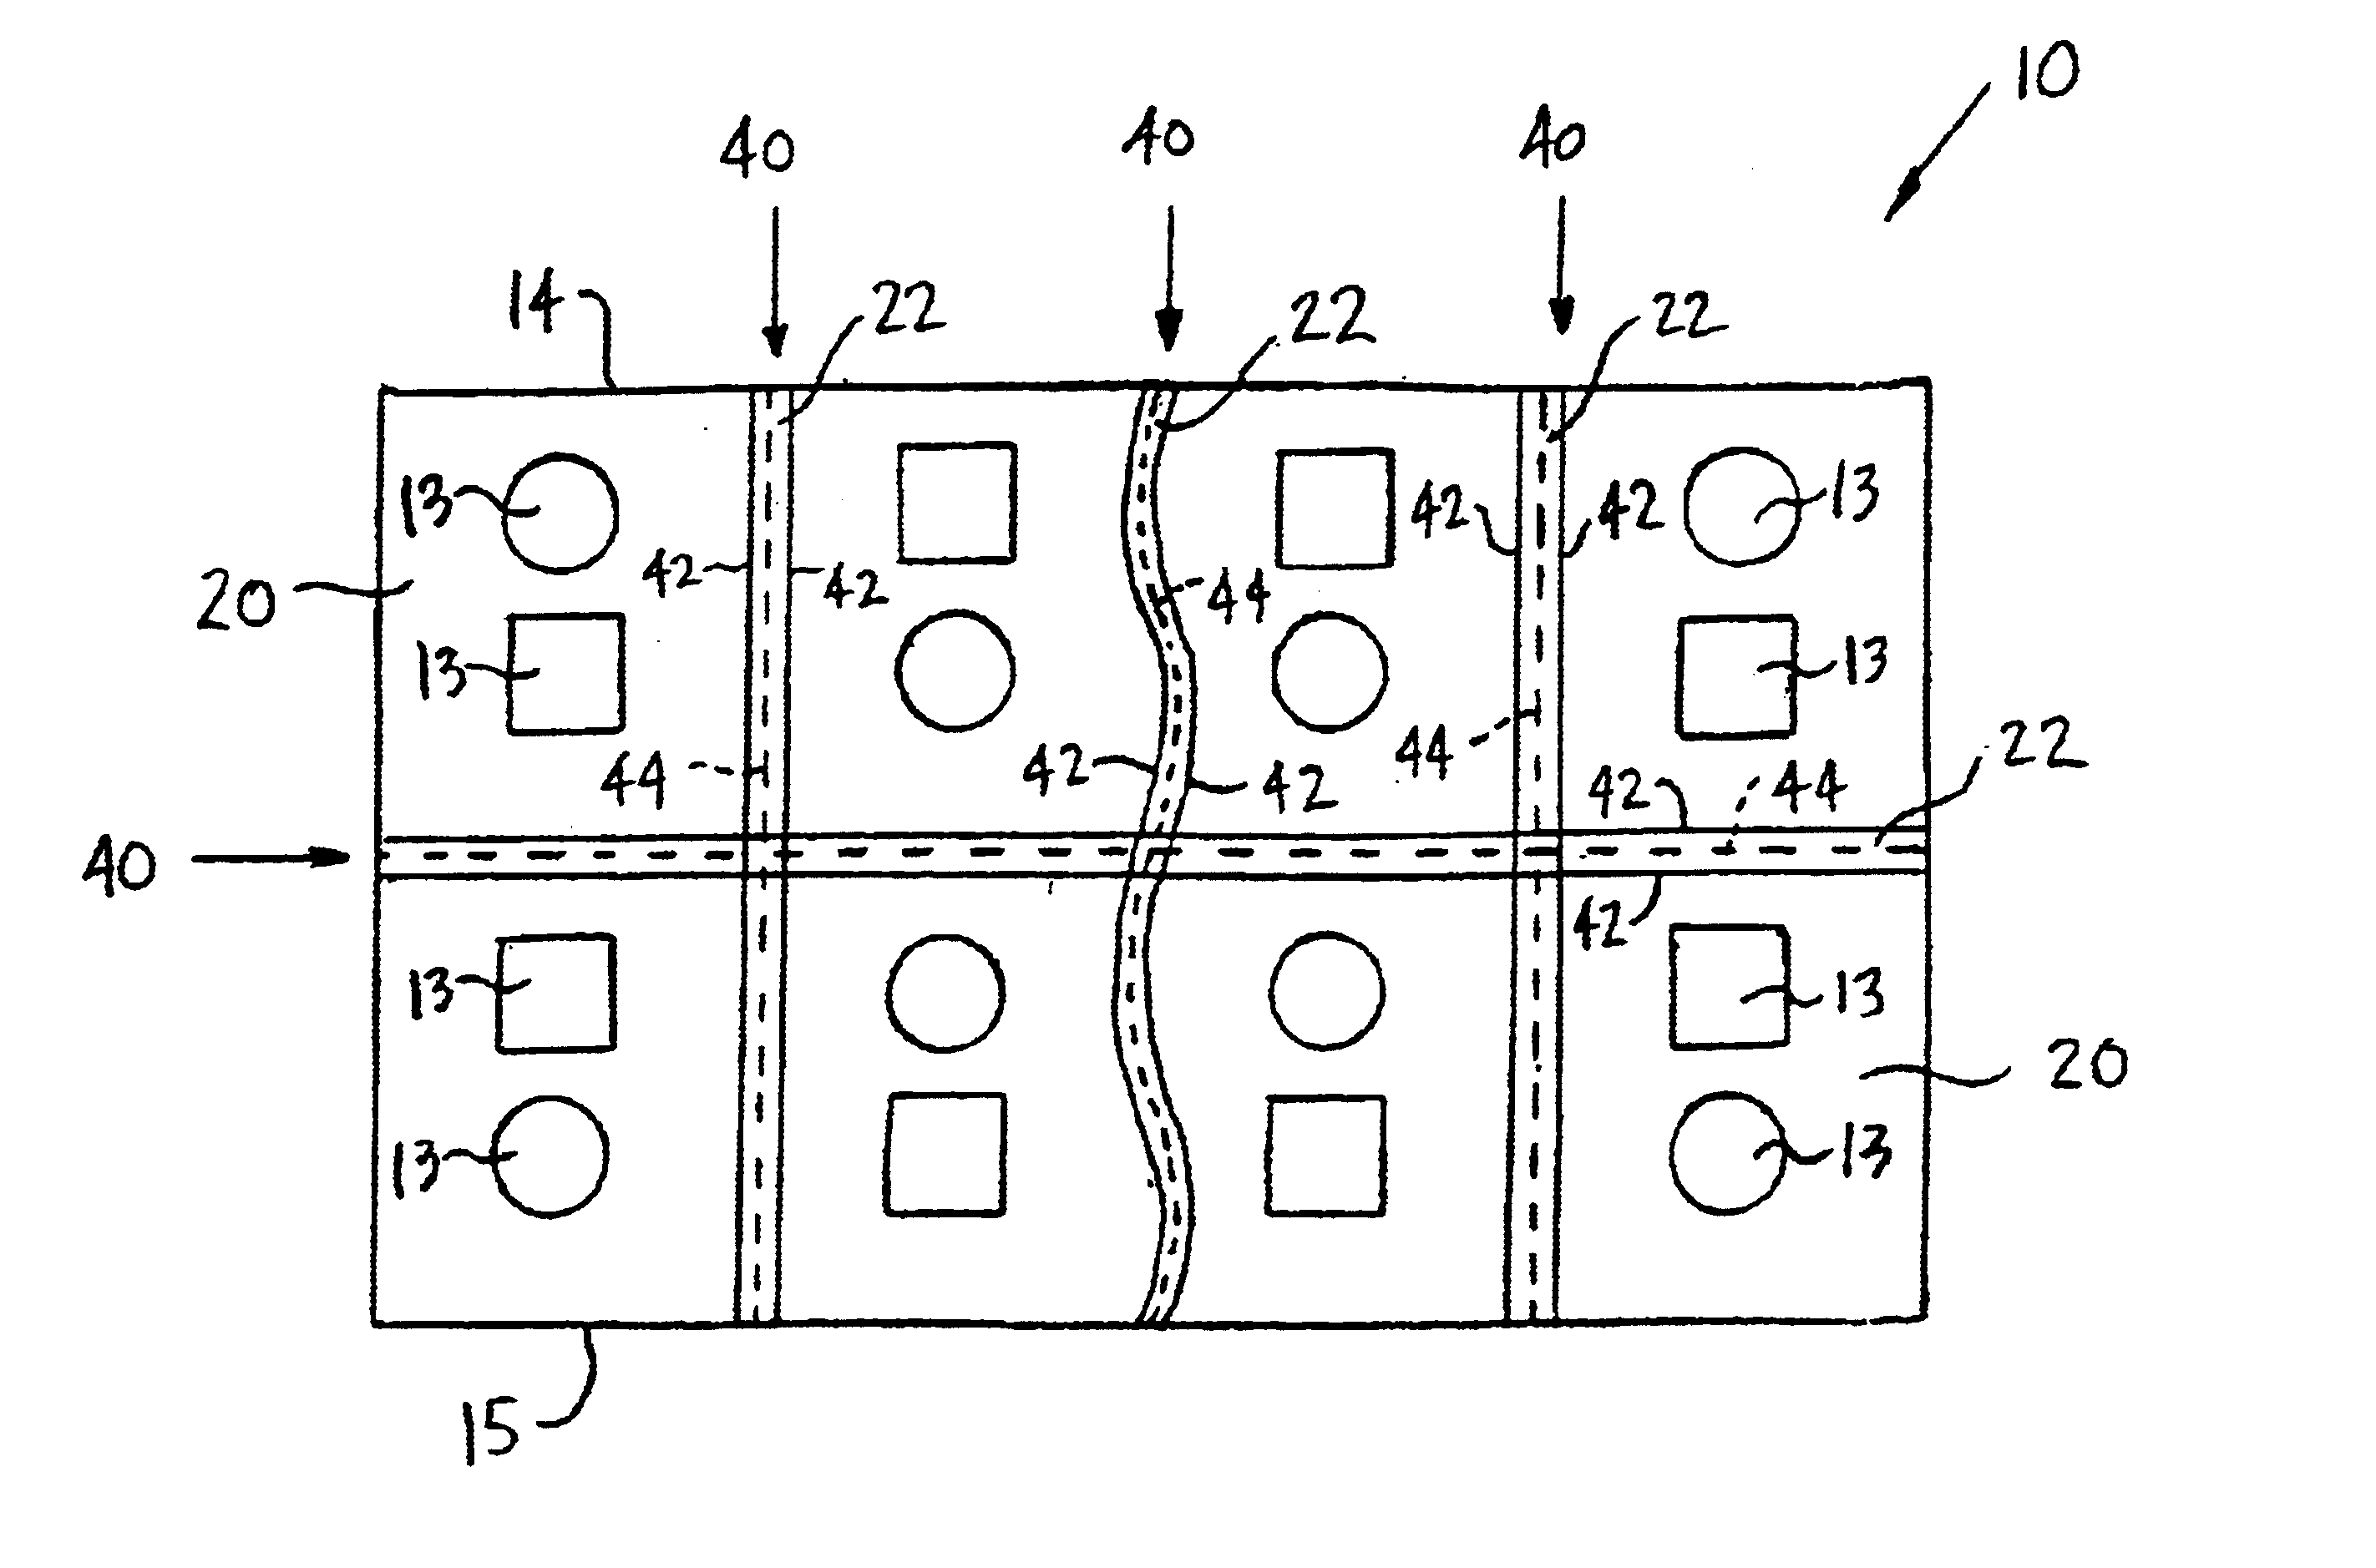 Apparatus for separating label assembly